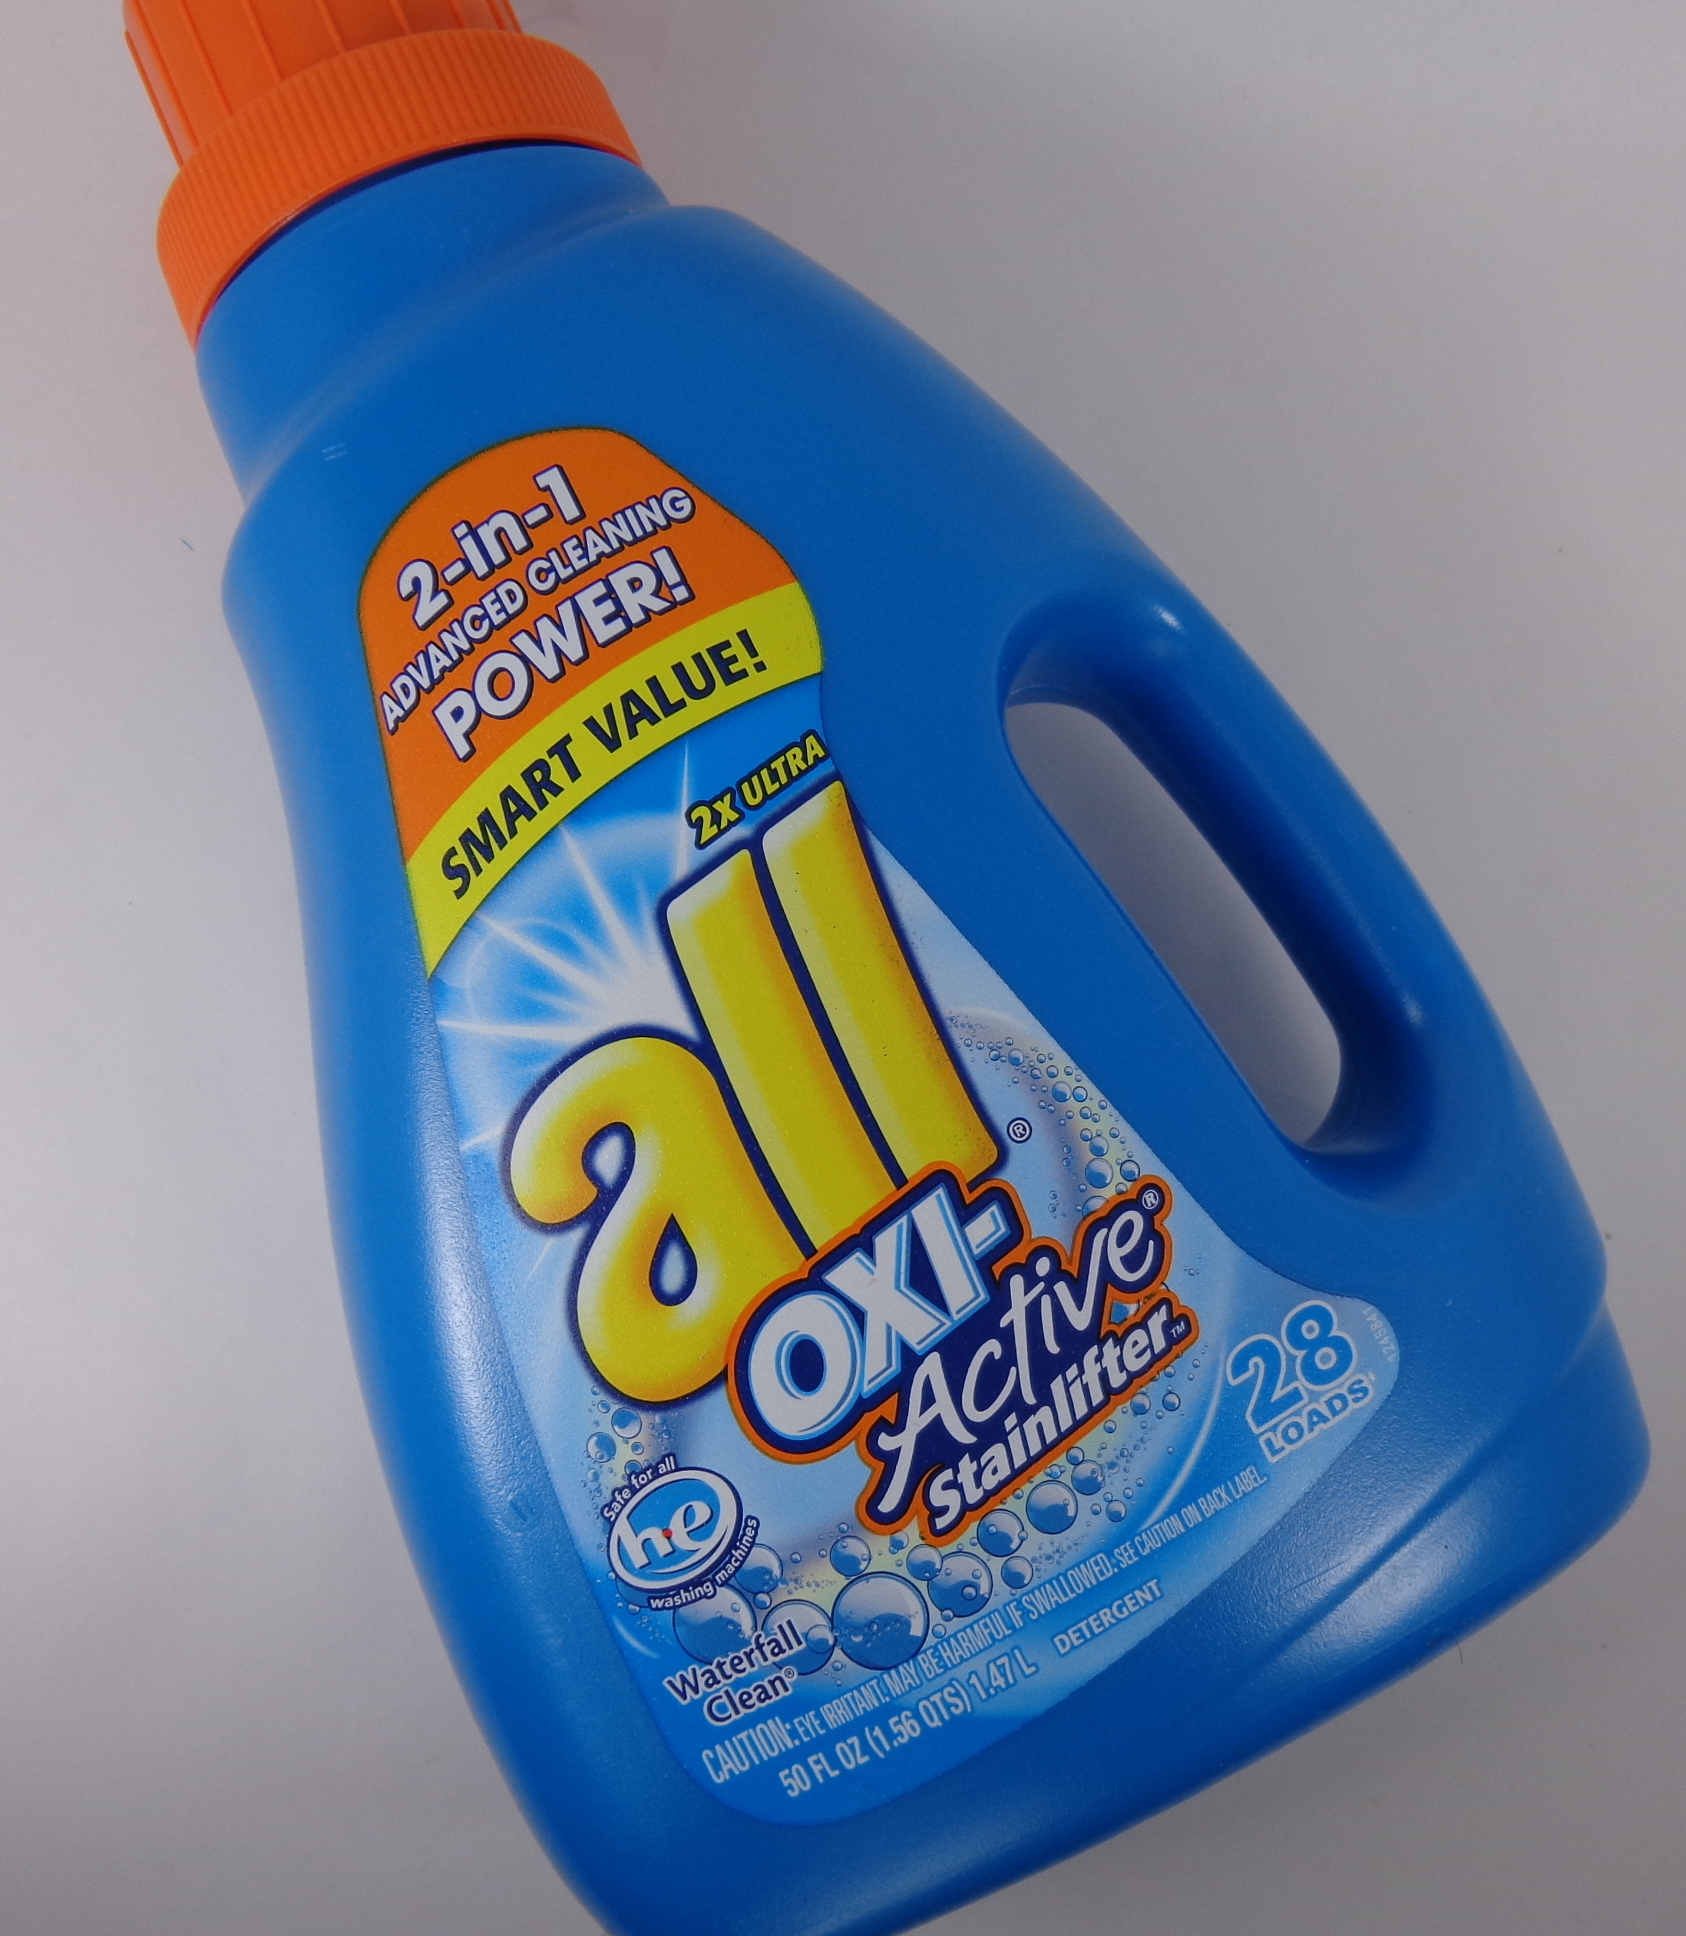 *CLOSED* Review & Giveaway: all OXI-Active Laundry Detergent (3 winners)